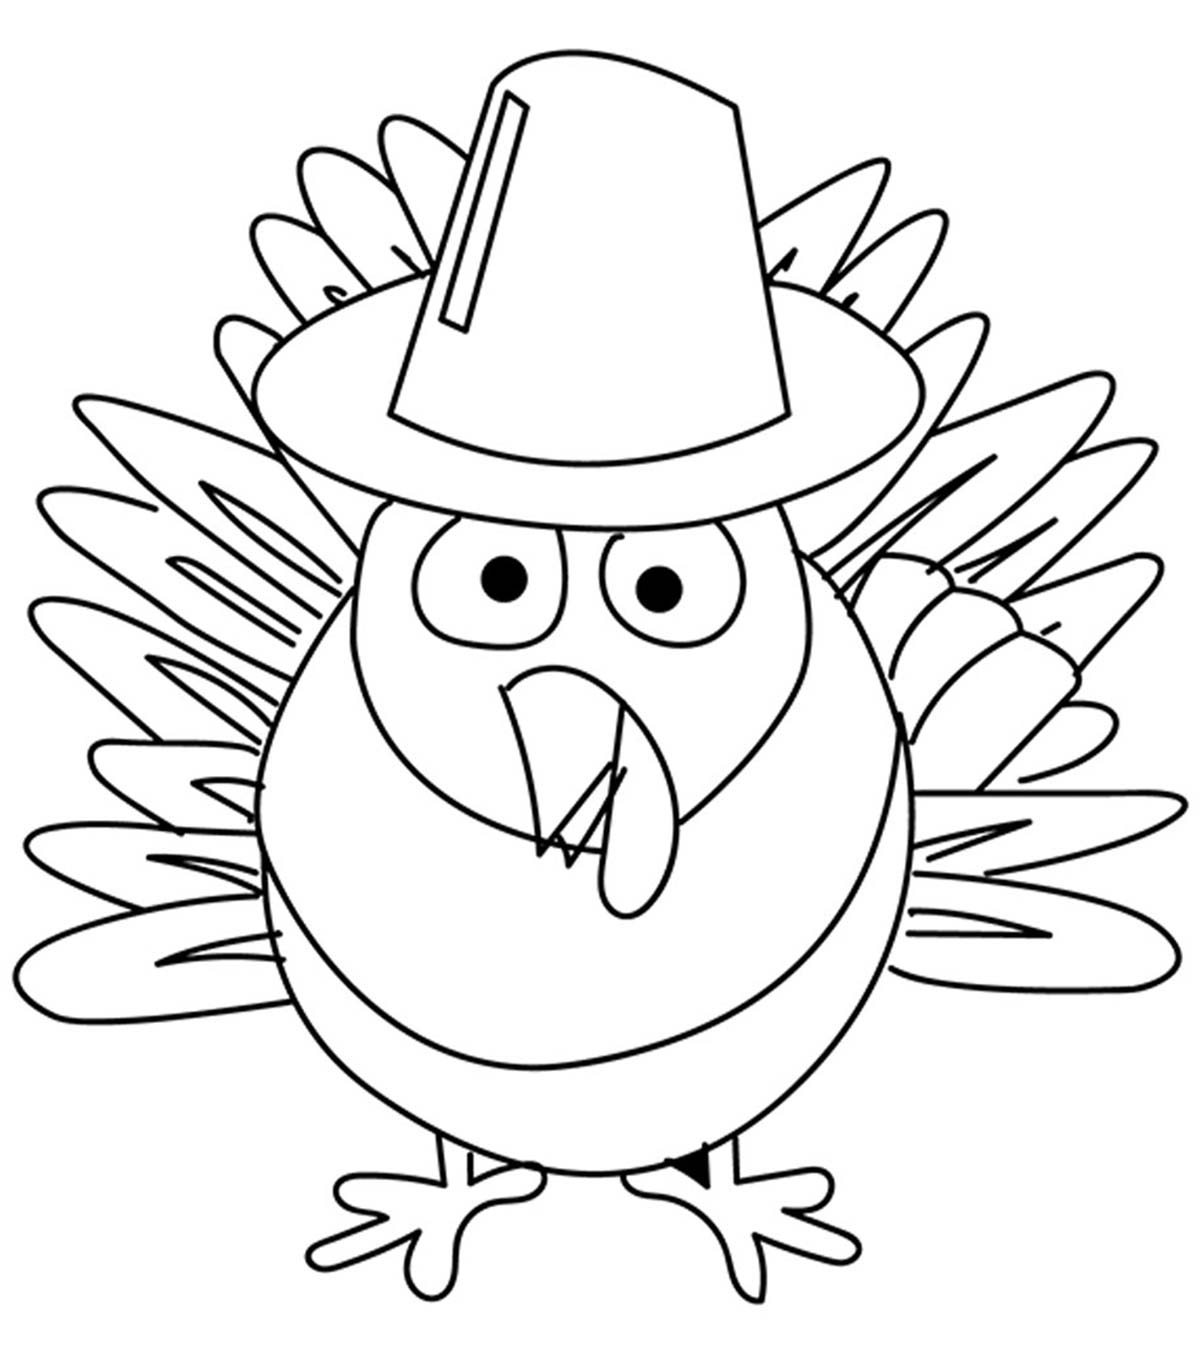 10 Best Thanksgiving Turkey Coloring Pages Your Toddler Will Love To Color